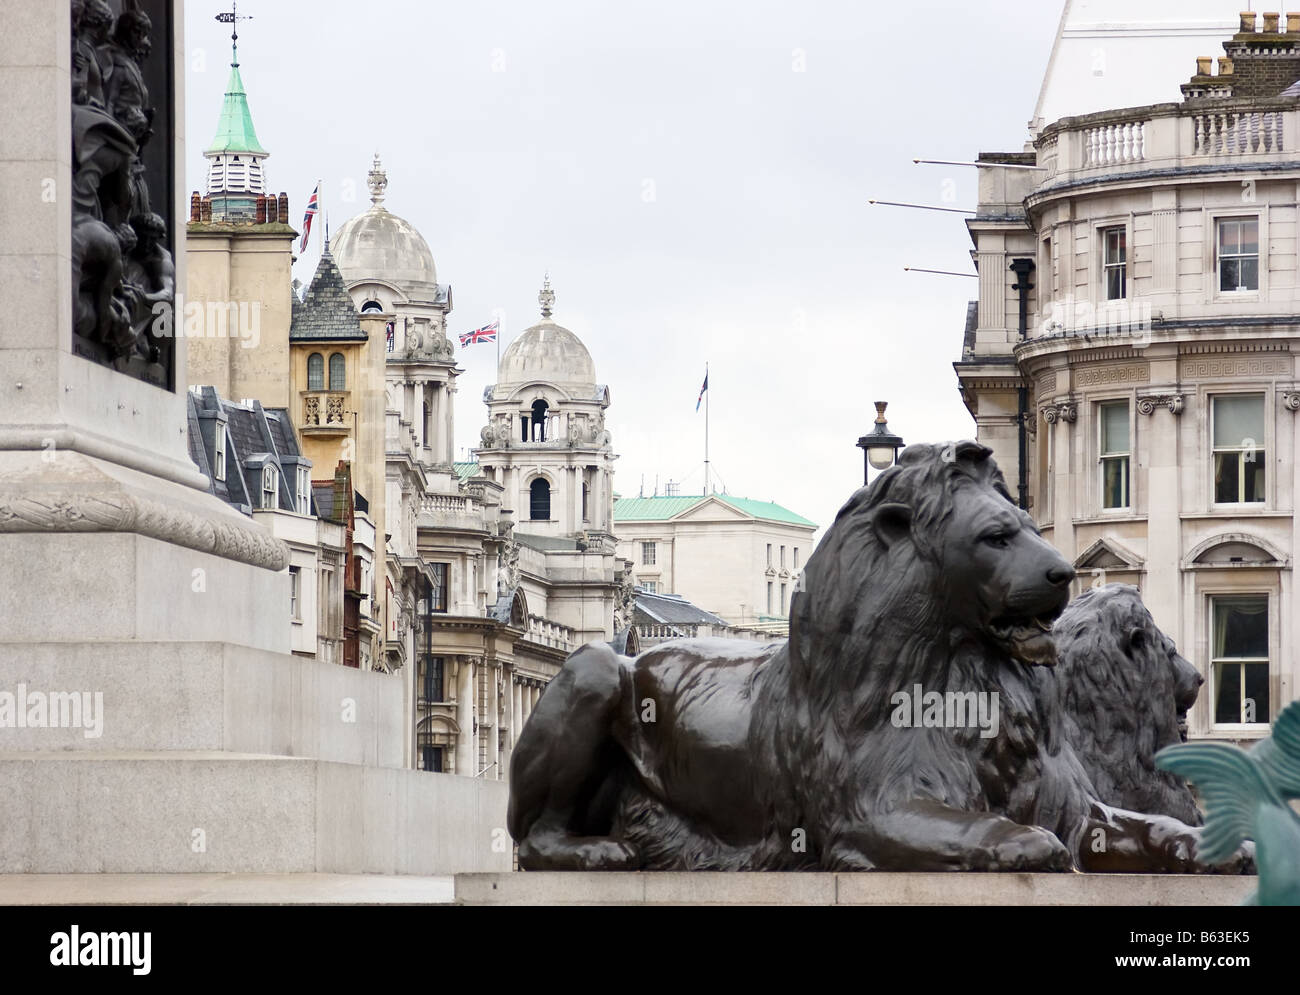 A view of statues and old buildings from the Trafalgar Square London UK Stock Photo